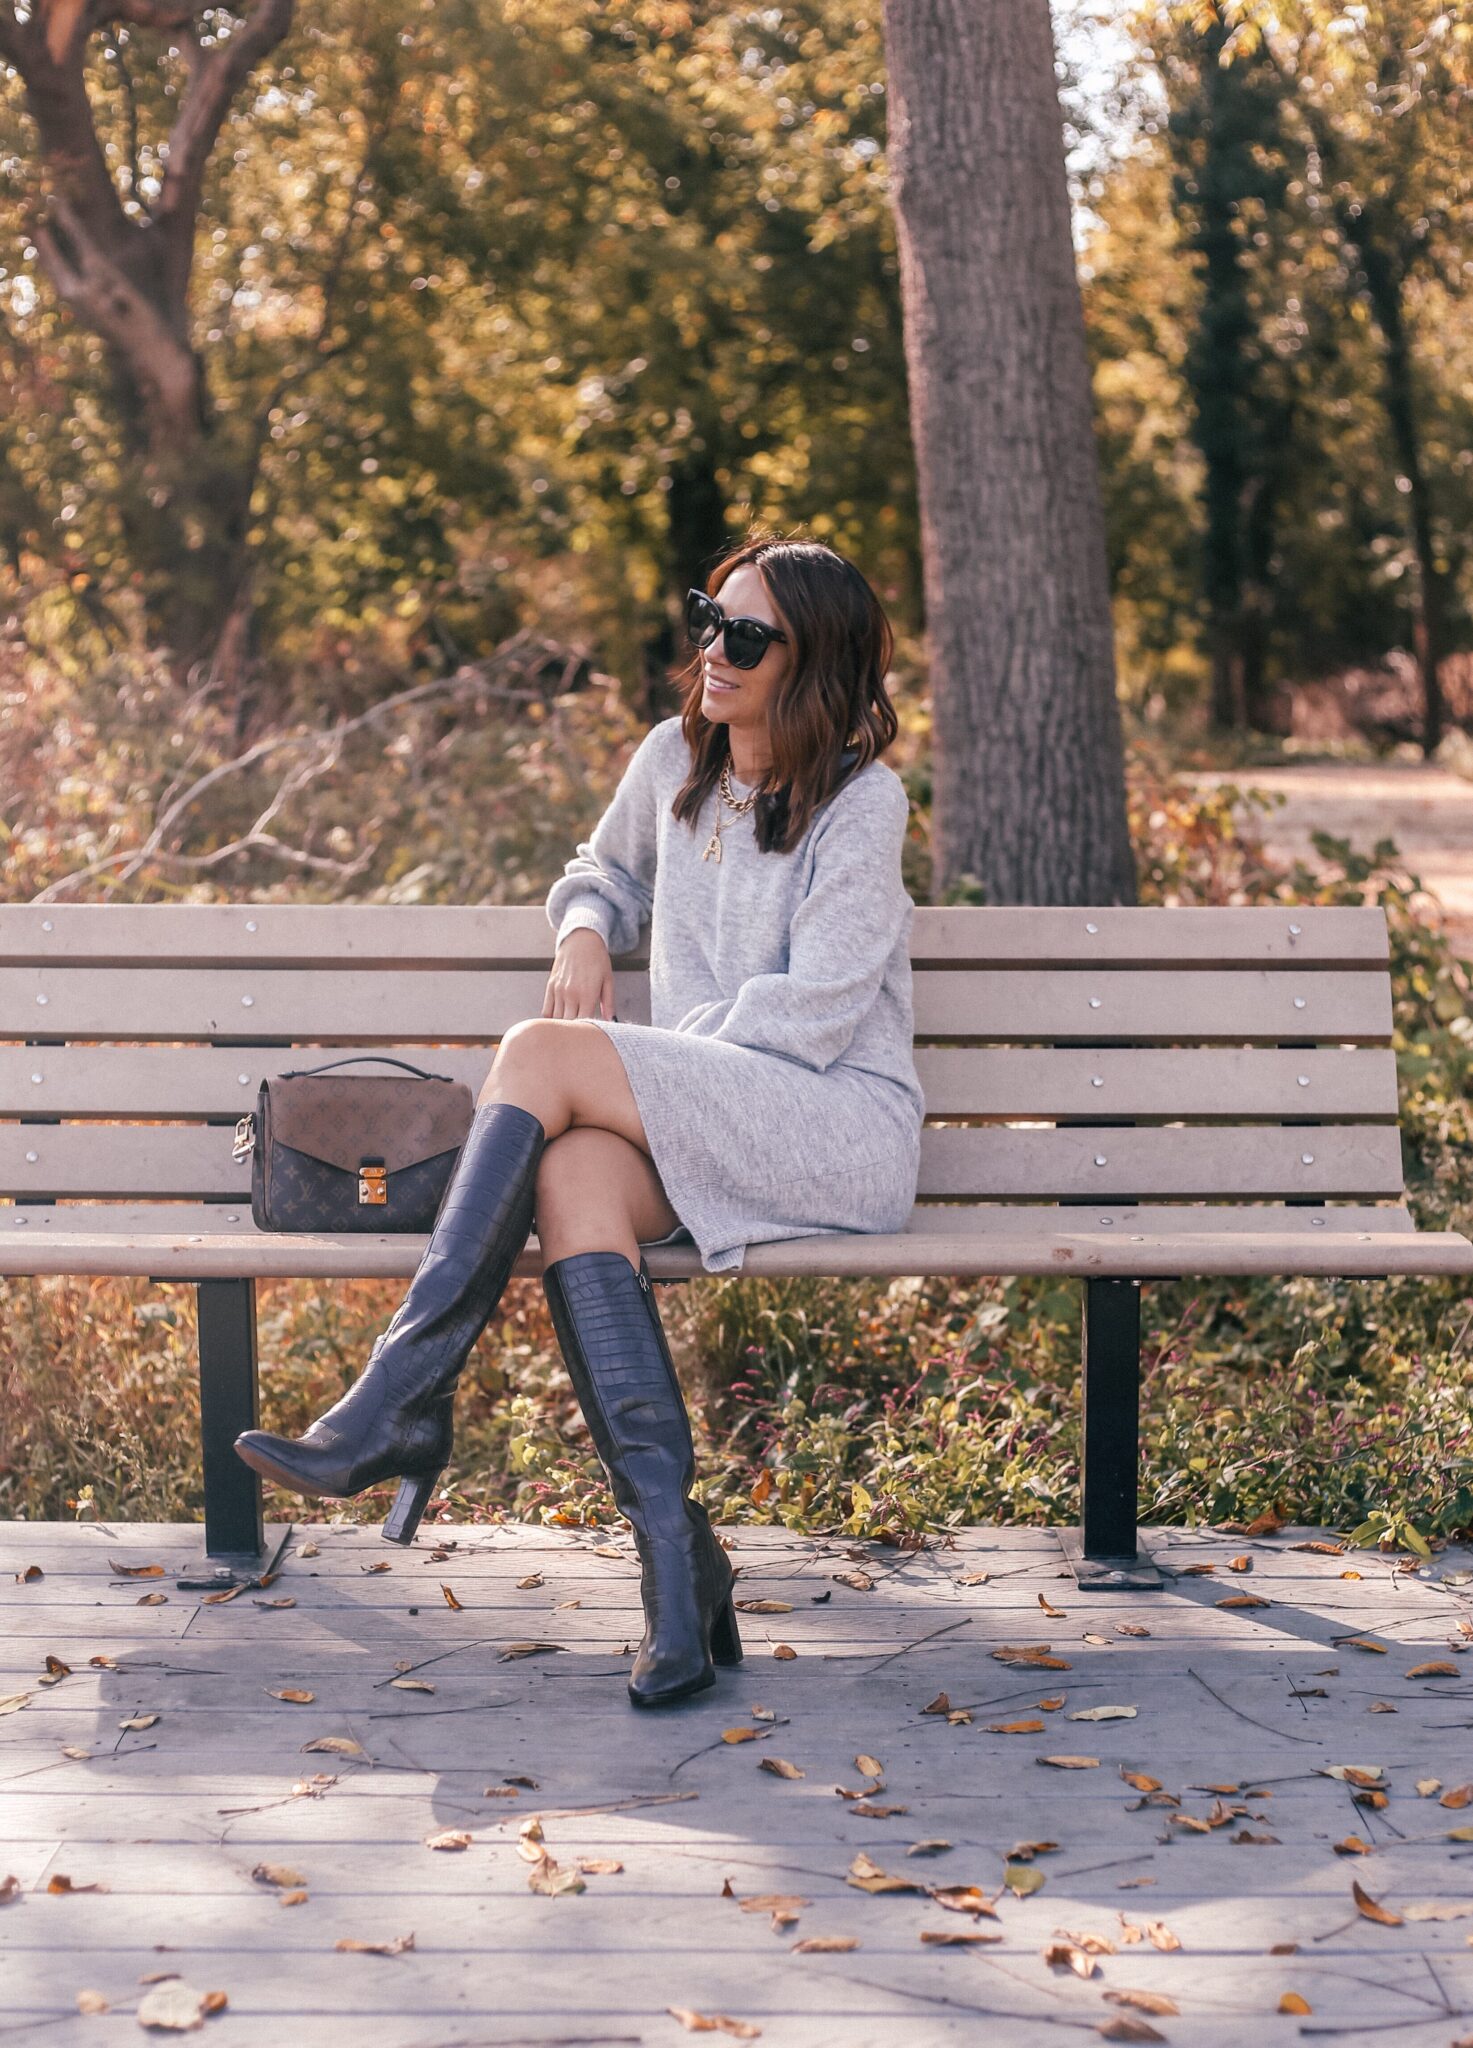 sweater dress, fall outfit ideas, knee high boots